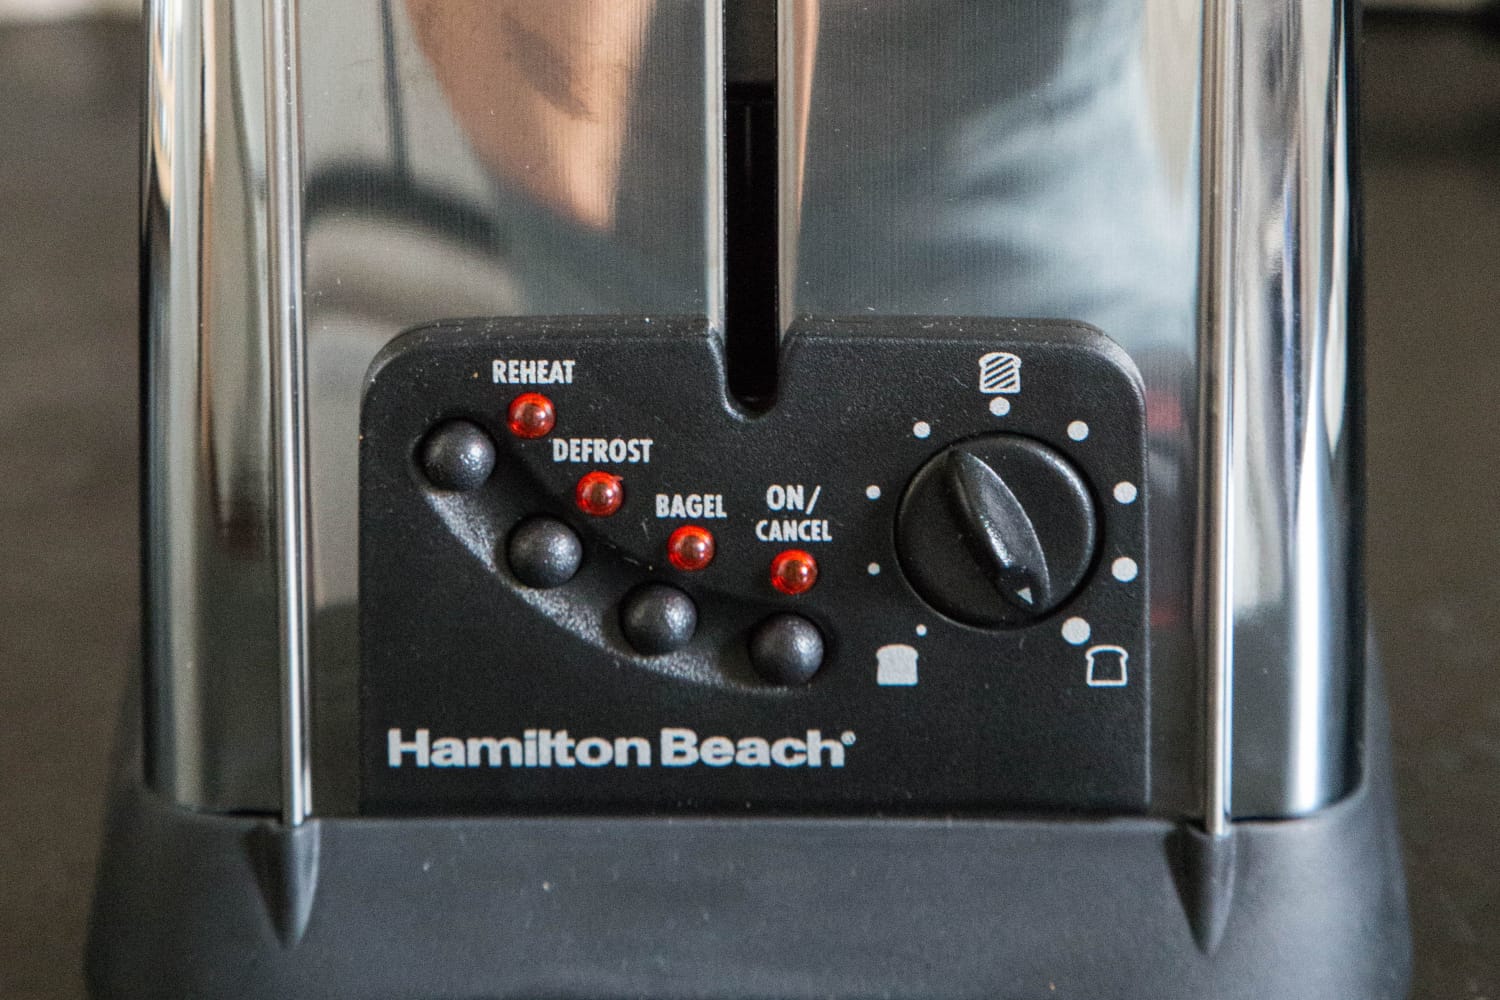 This Hamilton Beach Toaster Is All About Low-and-Slow Toasting